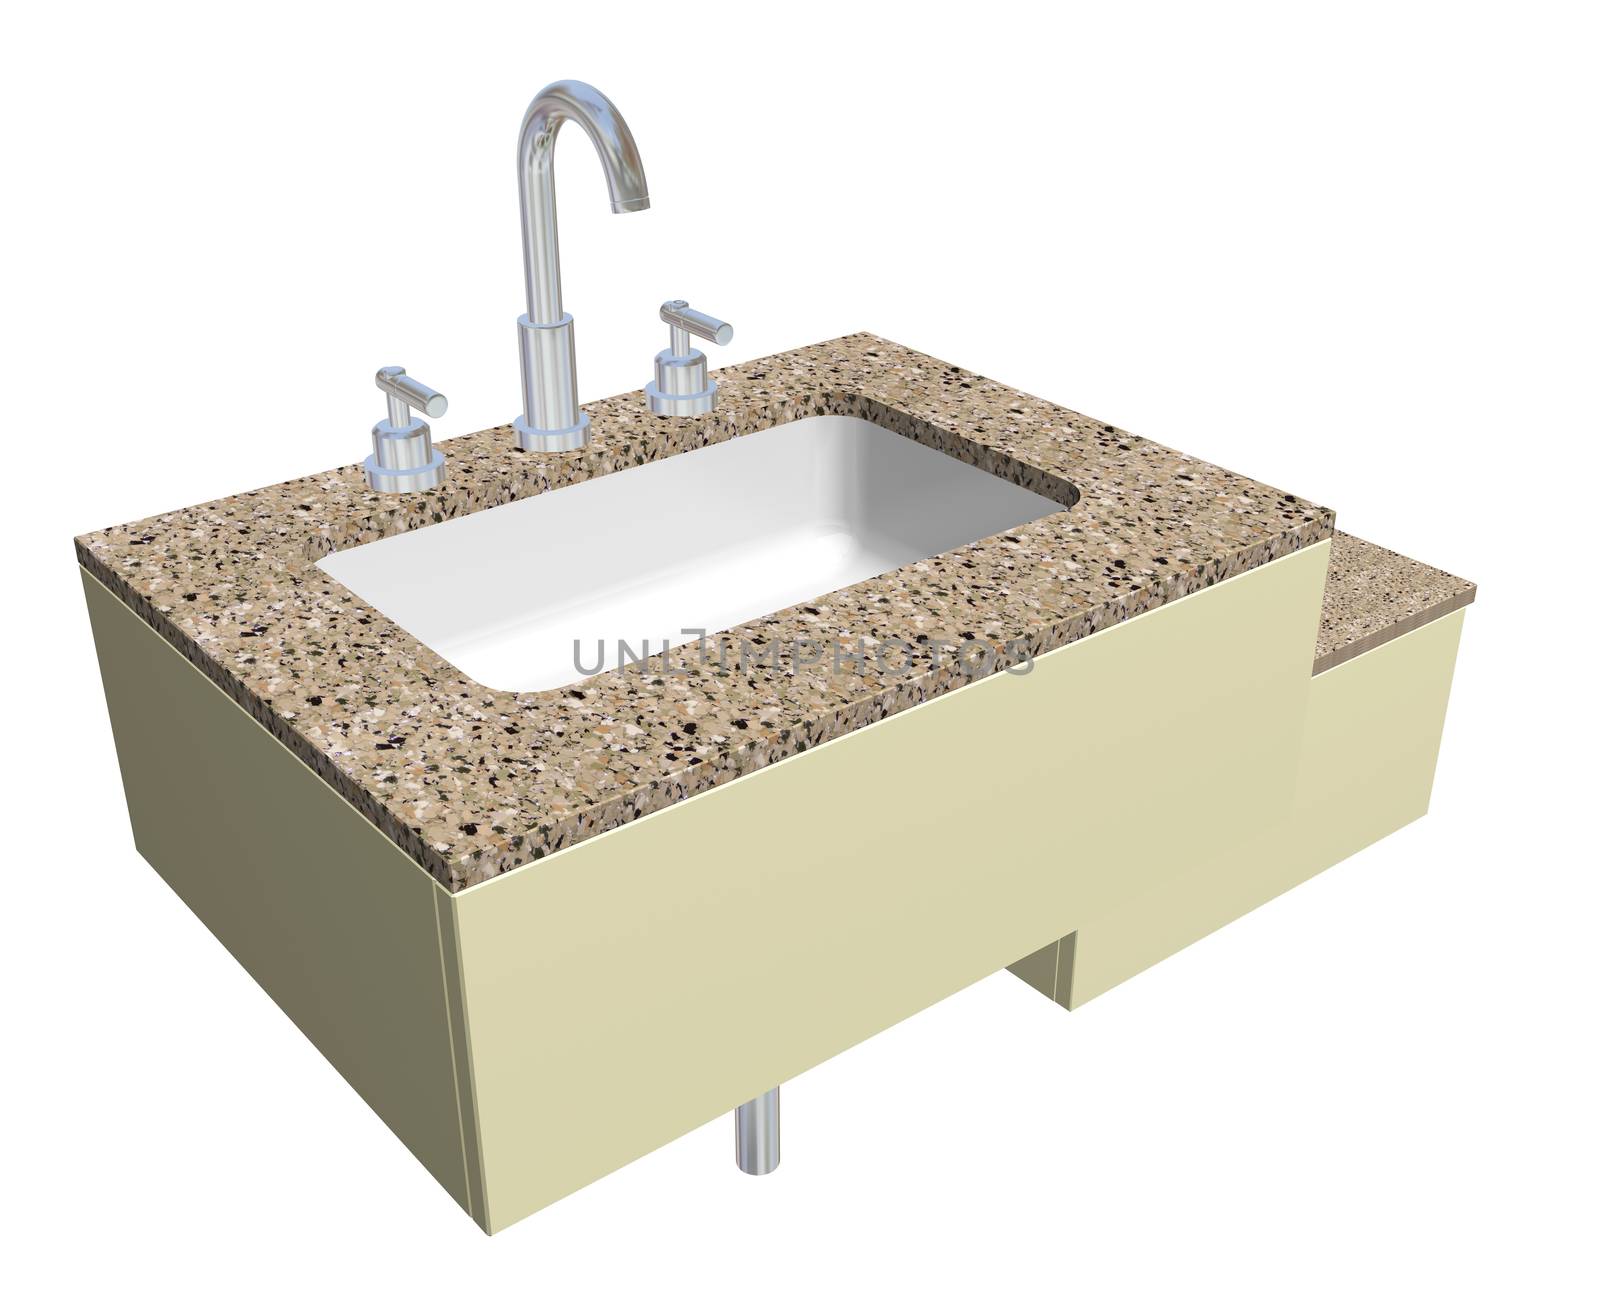 White built-in square bathroom sink with chrome faucet and plumbing fixtures, with a granite countertop, isolated against a white background.